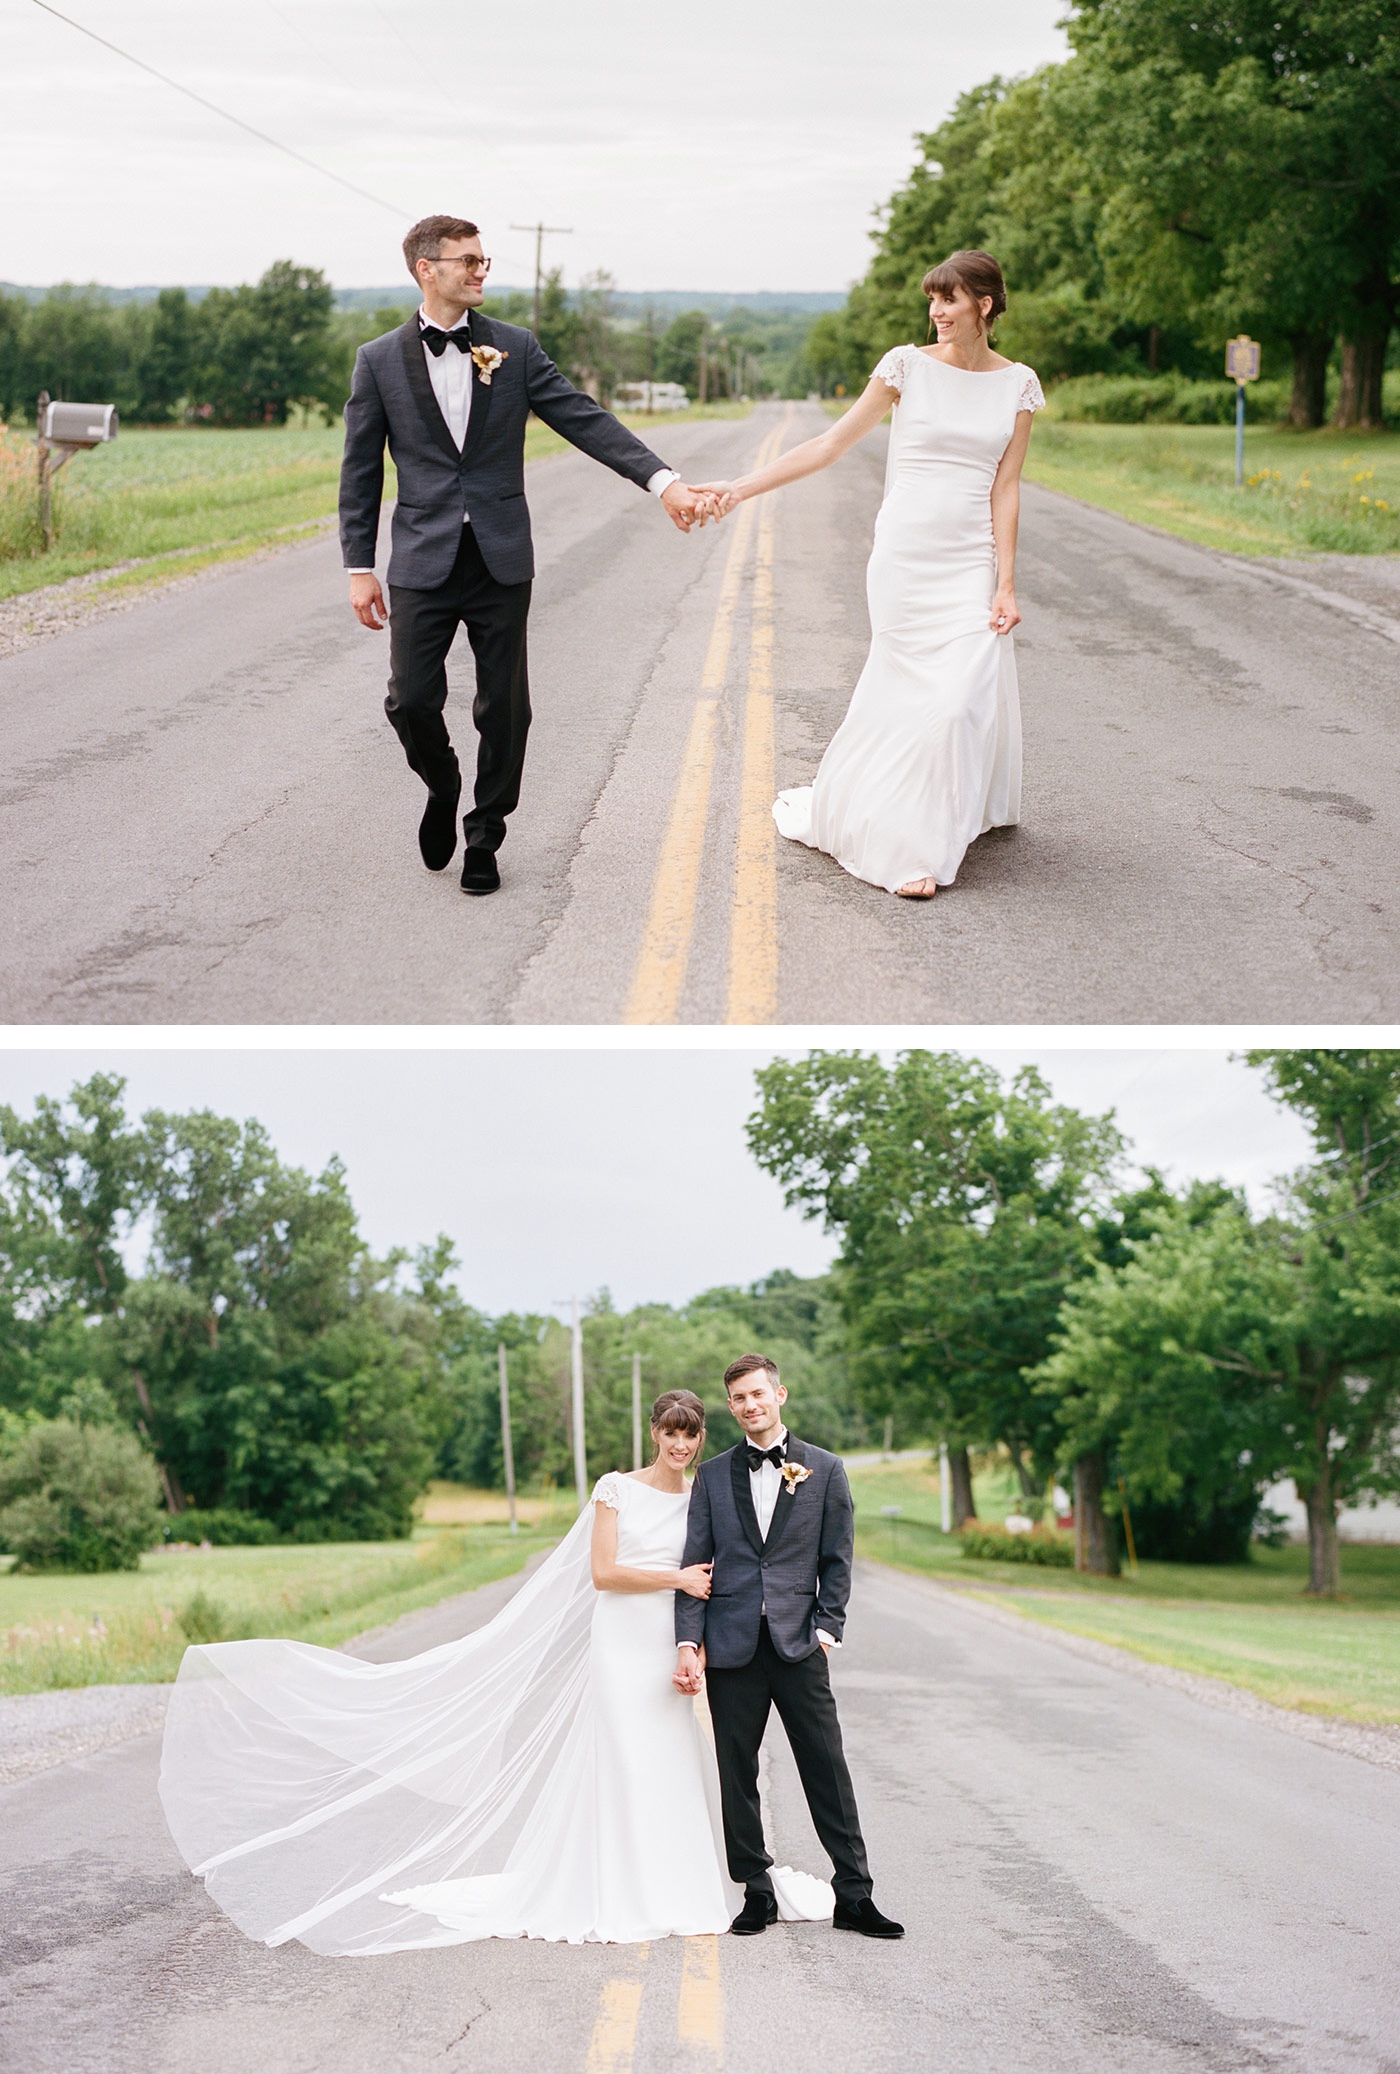 Bride and groom at Reed Homstead, Livonia, New York